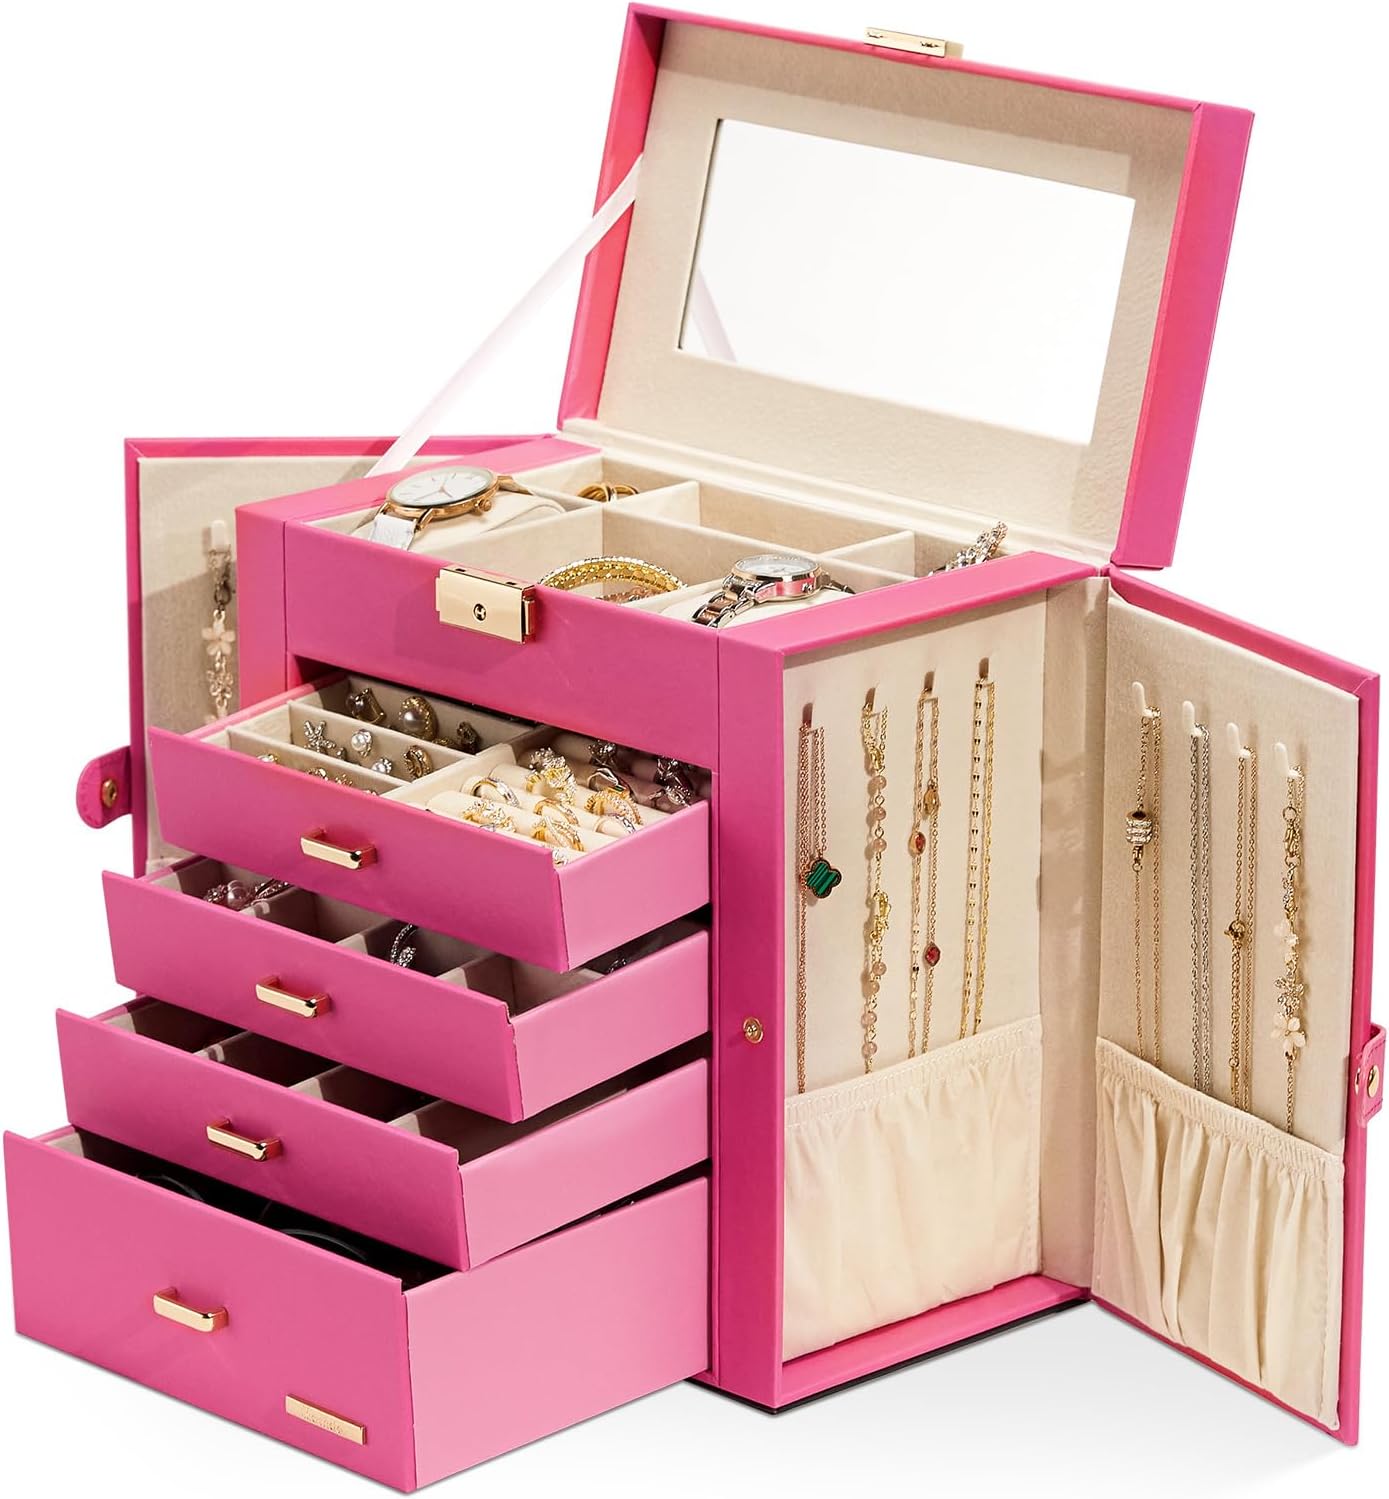 Homde Synthetic Leather Huge Jewelry Box Mirrored Watch Organizer Necklace Ring Earring Storage Lockable Gift Case (Pink + Gold)